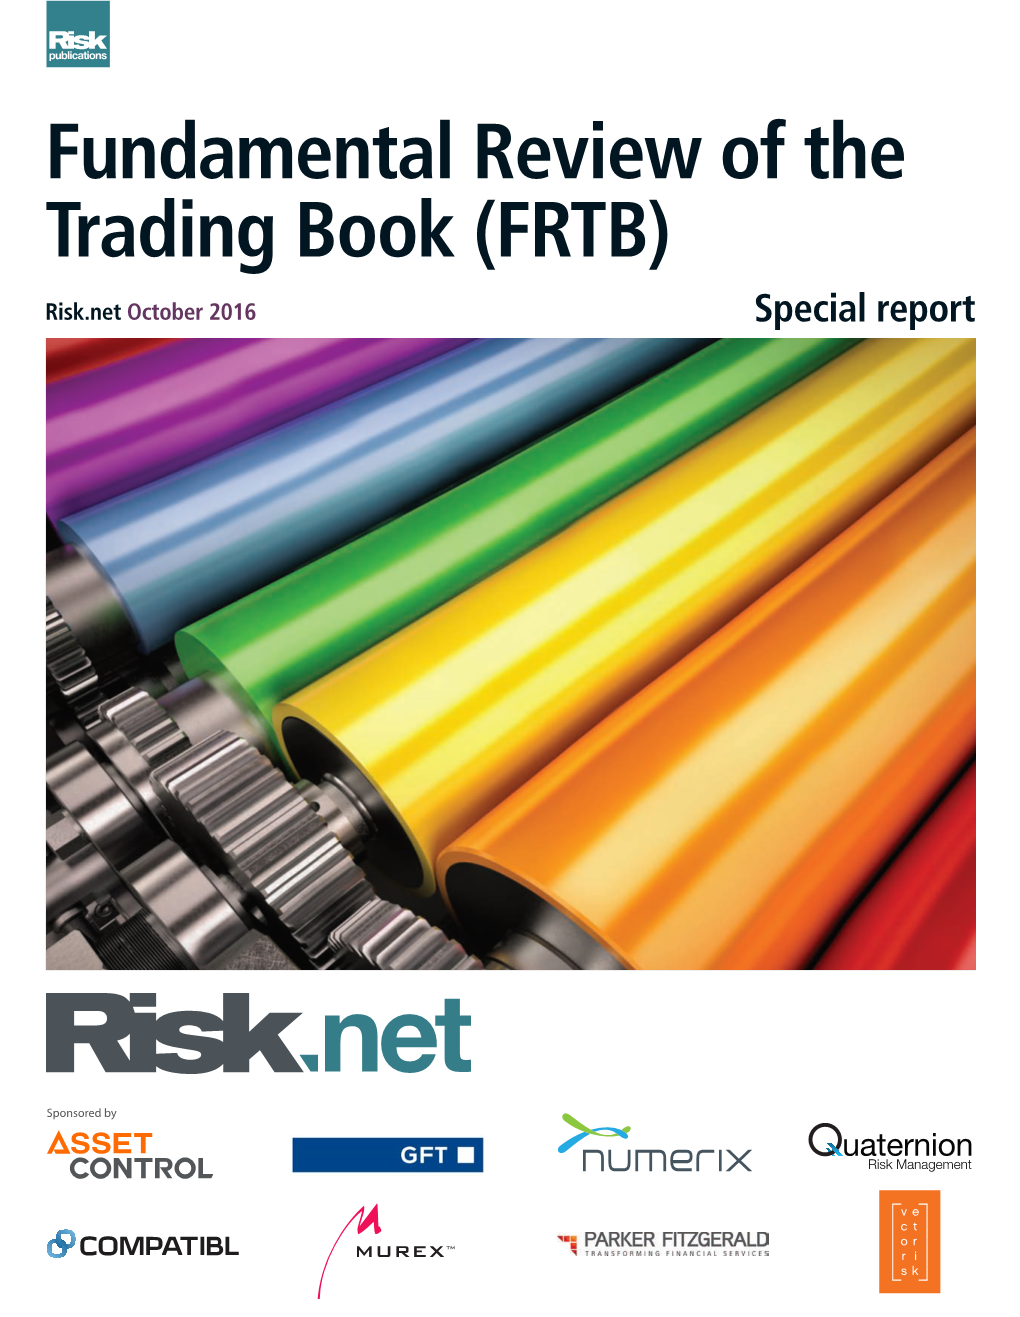 Fundamental Review of the Trading Book (FRTB) Risk.Net October 2016 Special Report